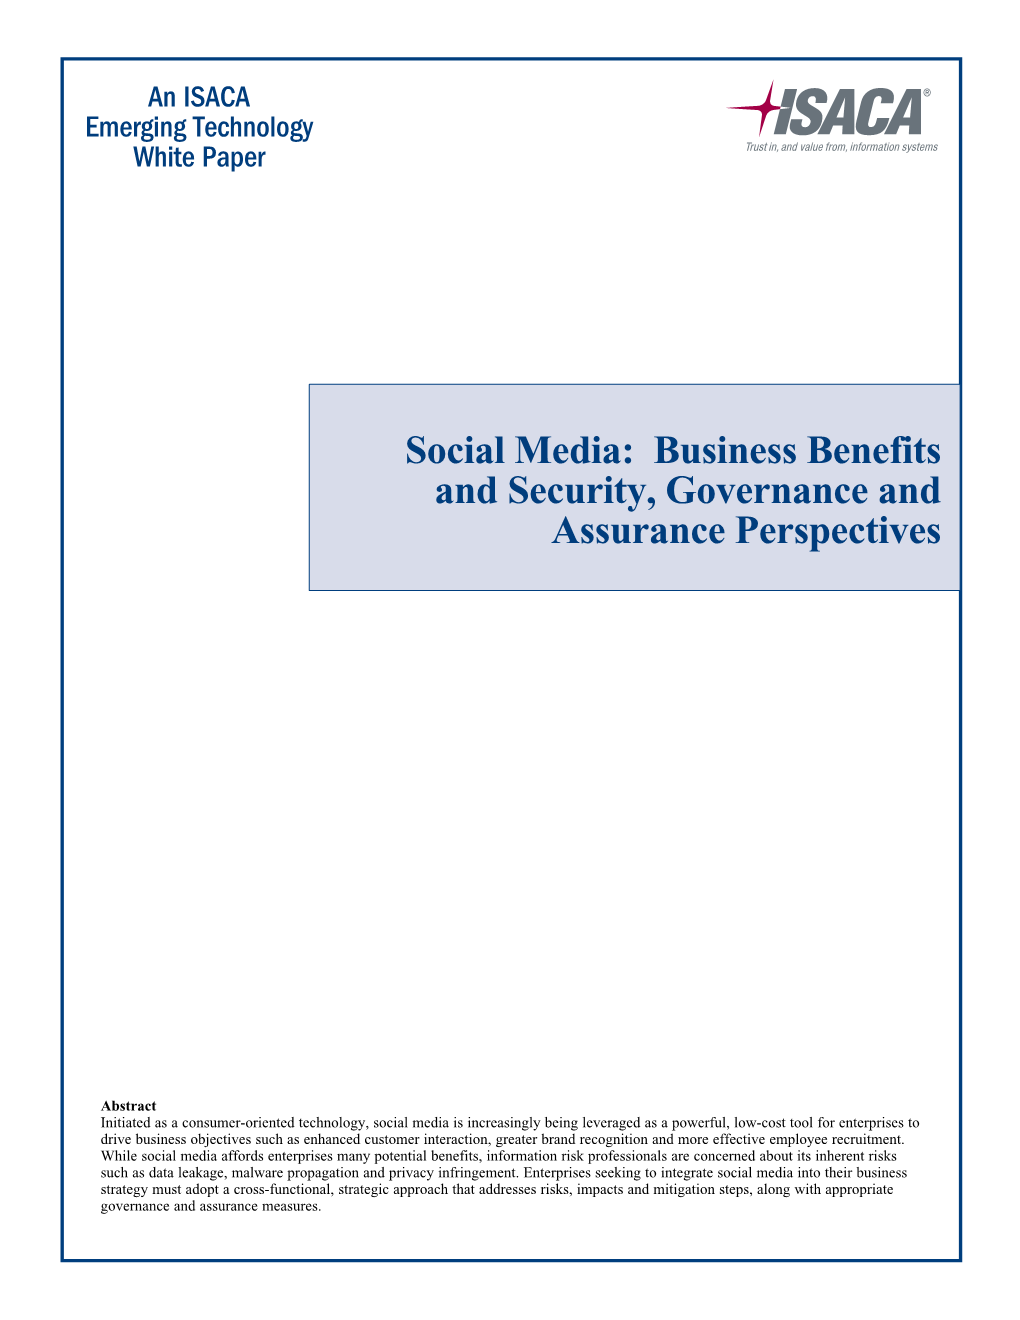 Social Media: Business Benefits and Security, Governance and Assurance Perspectives